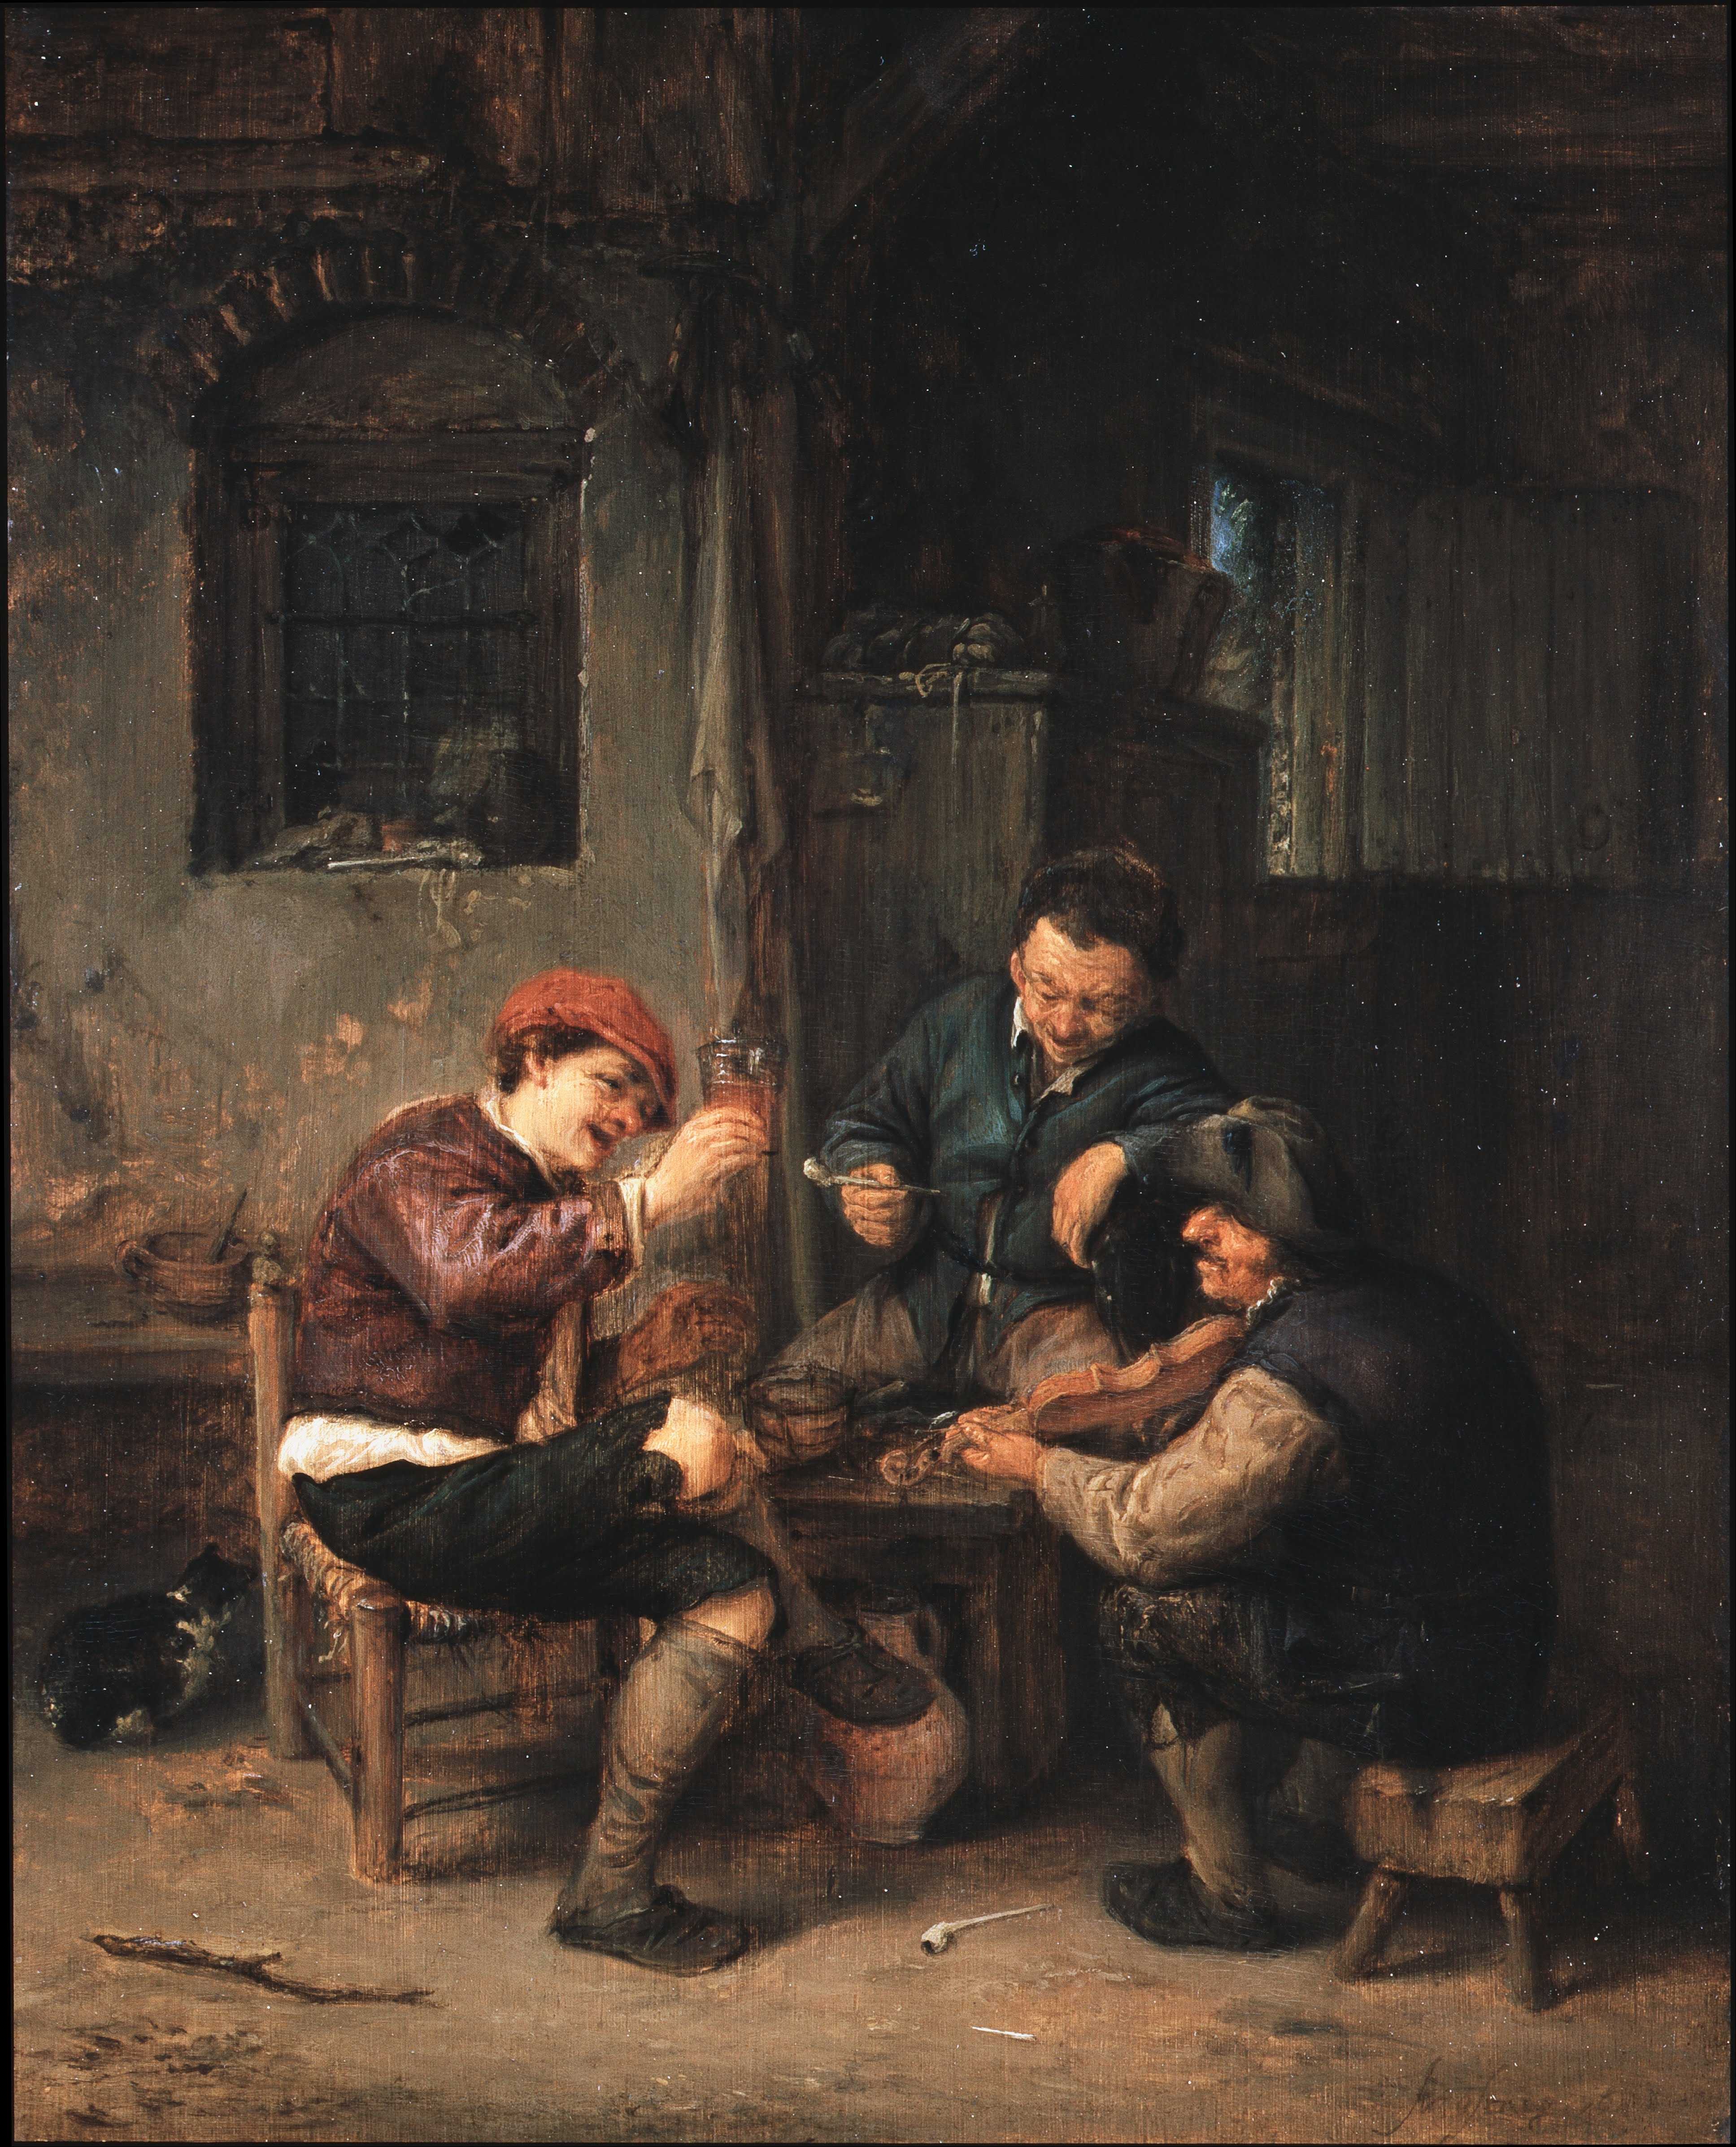 Find out more about Adriaen van Ostade - Three Peasants at an Inn